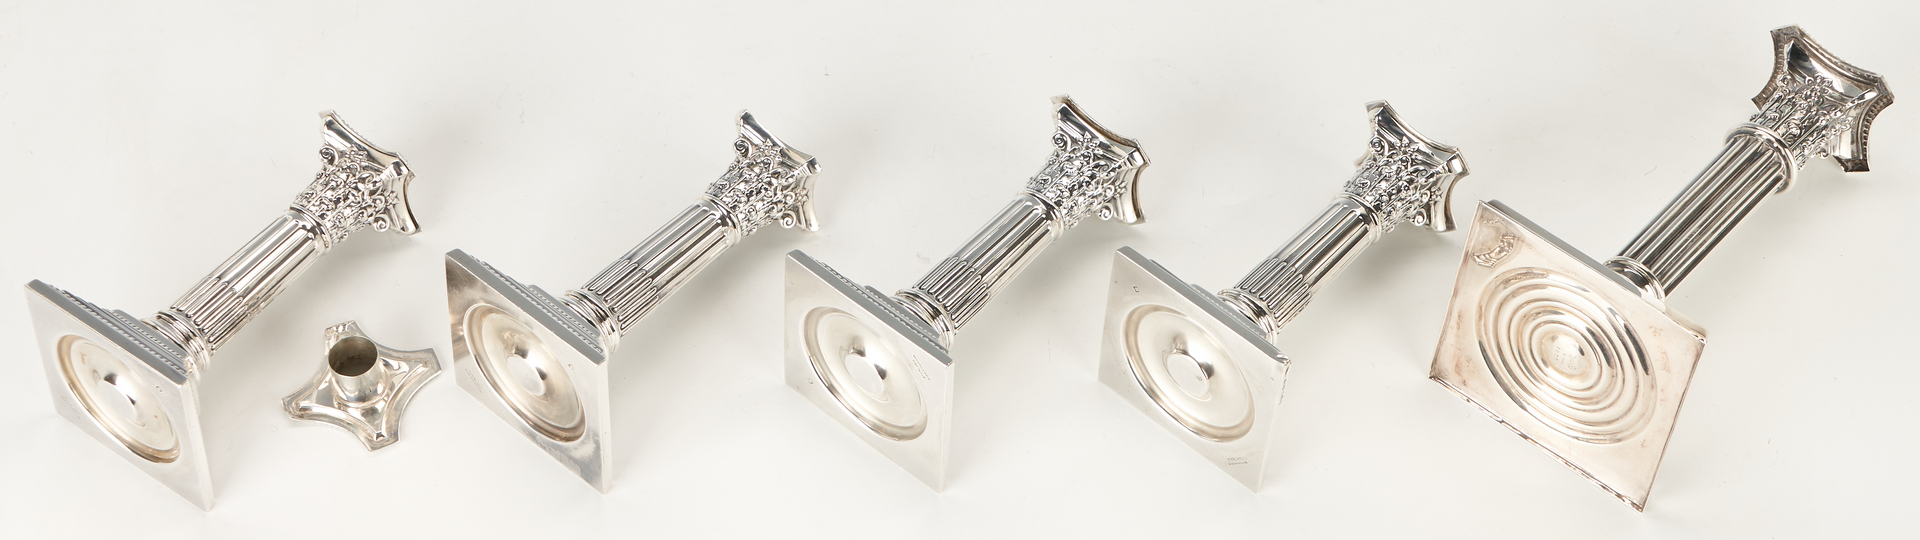 Lot 102: 6 Corinthian Column Sterling Silver Candlesticks, incl. Tiffany, Weighted Bases